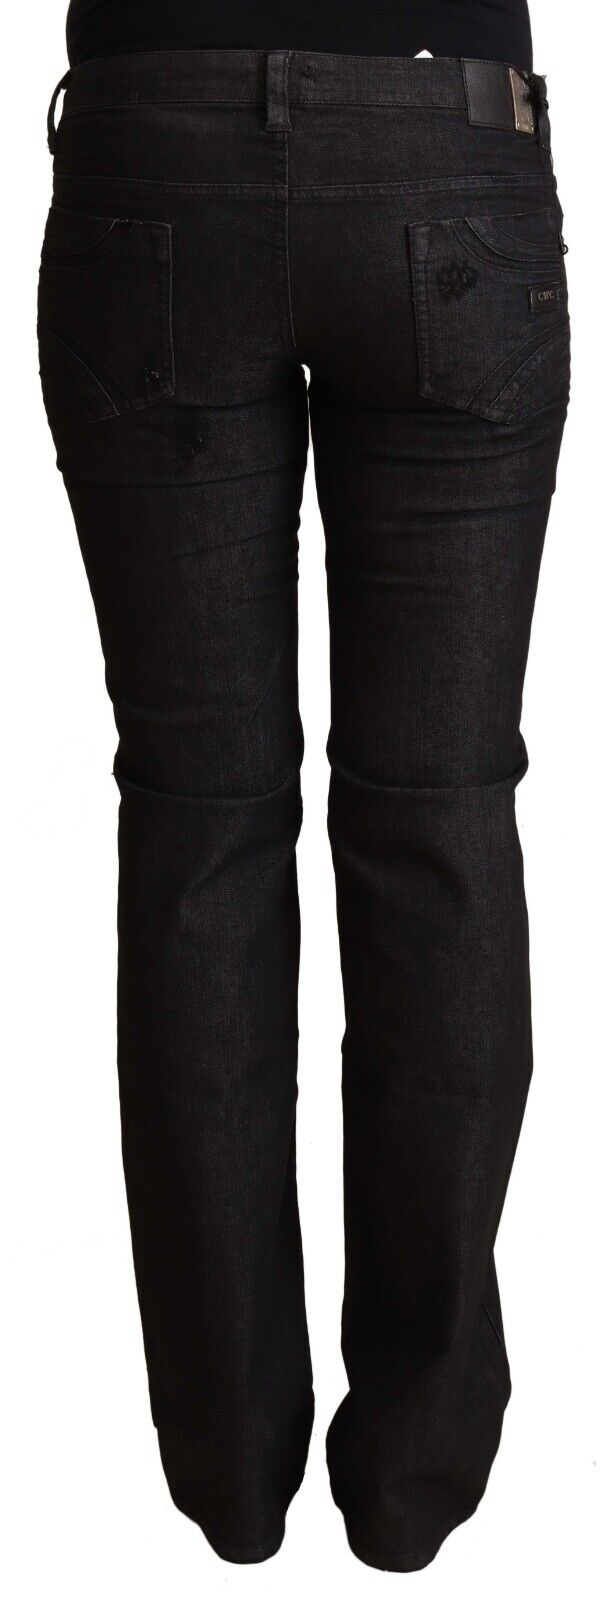 Costume National Black Cotton Low Waist Skinny Jeans